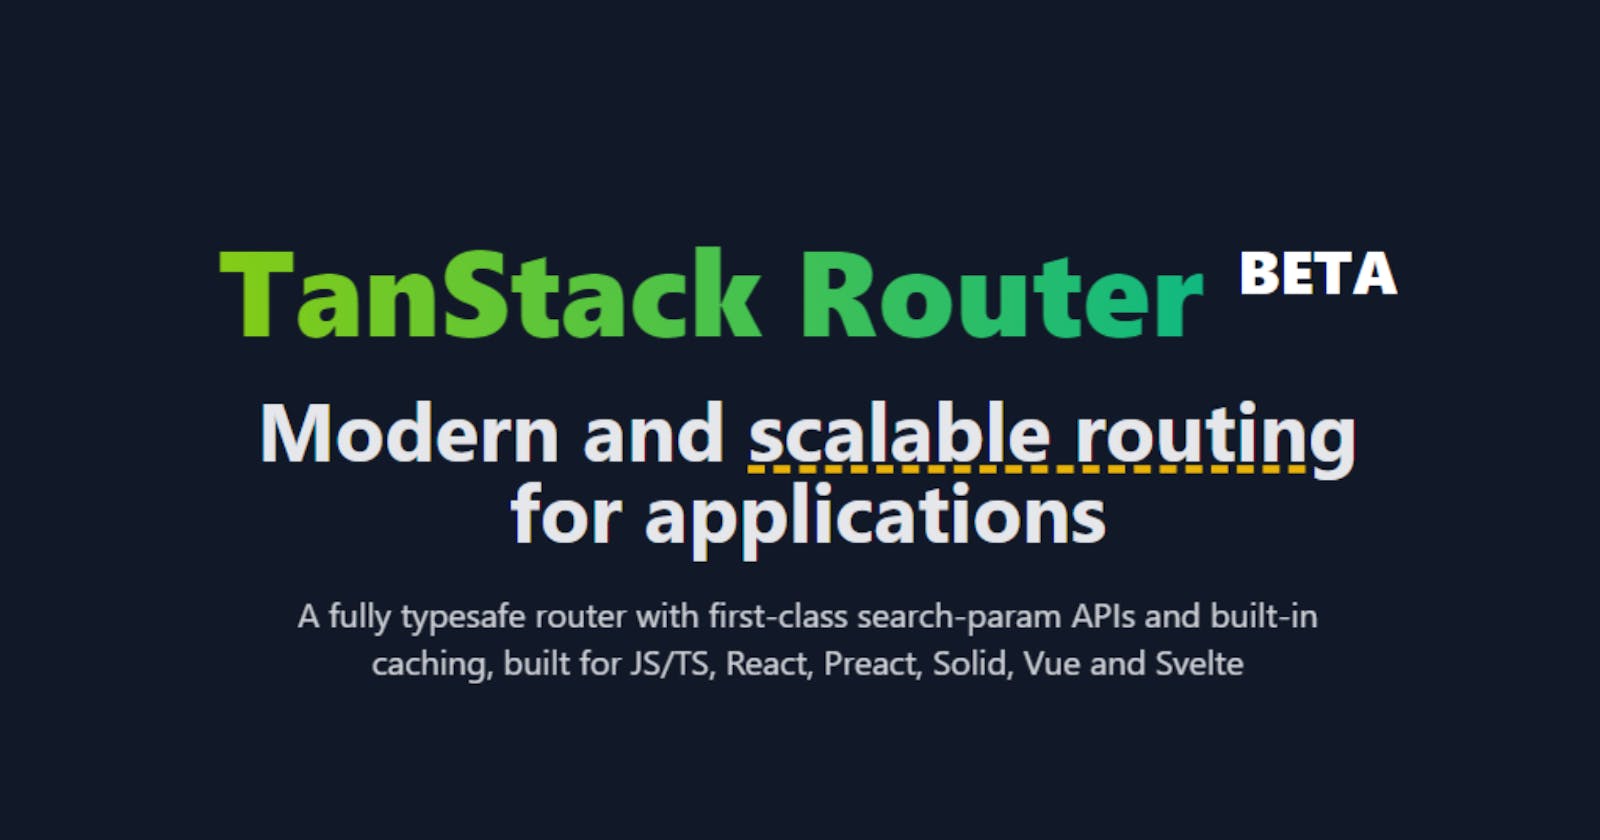 Getting Started With Tanstack Router, Full type-safe routes for your react app